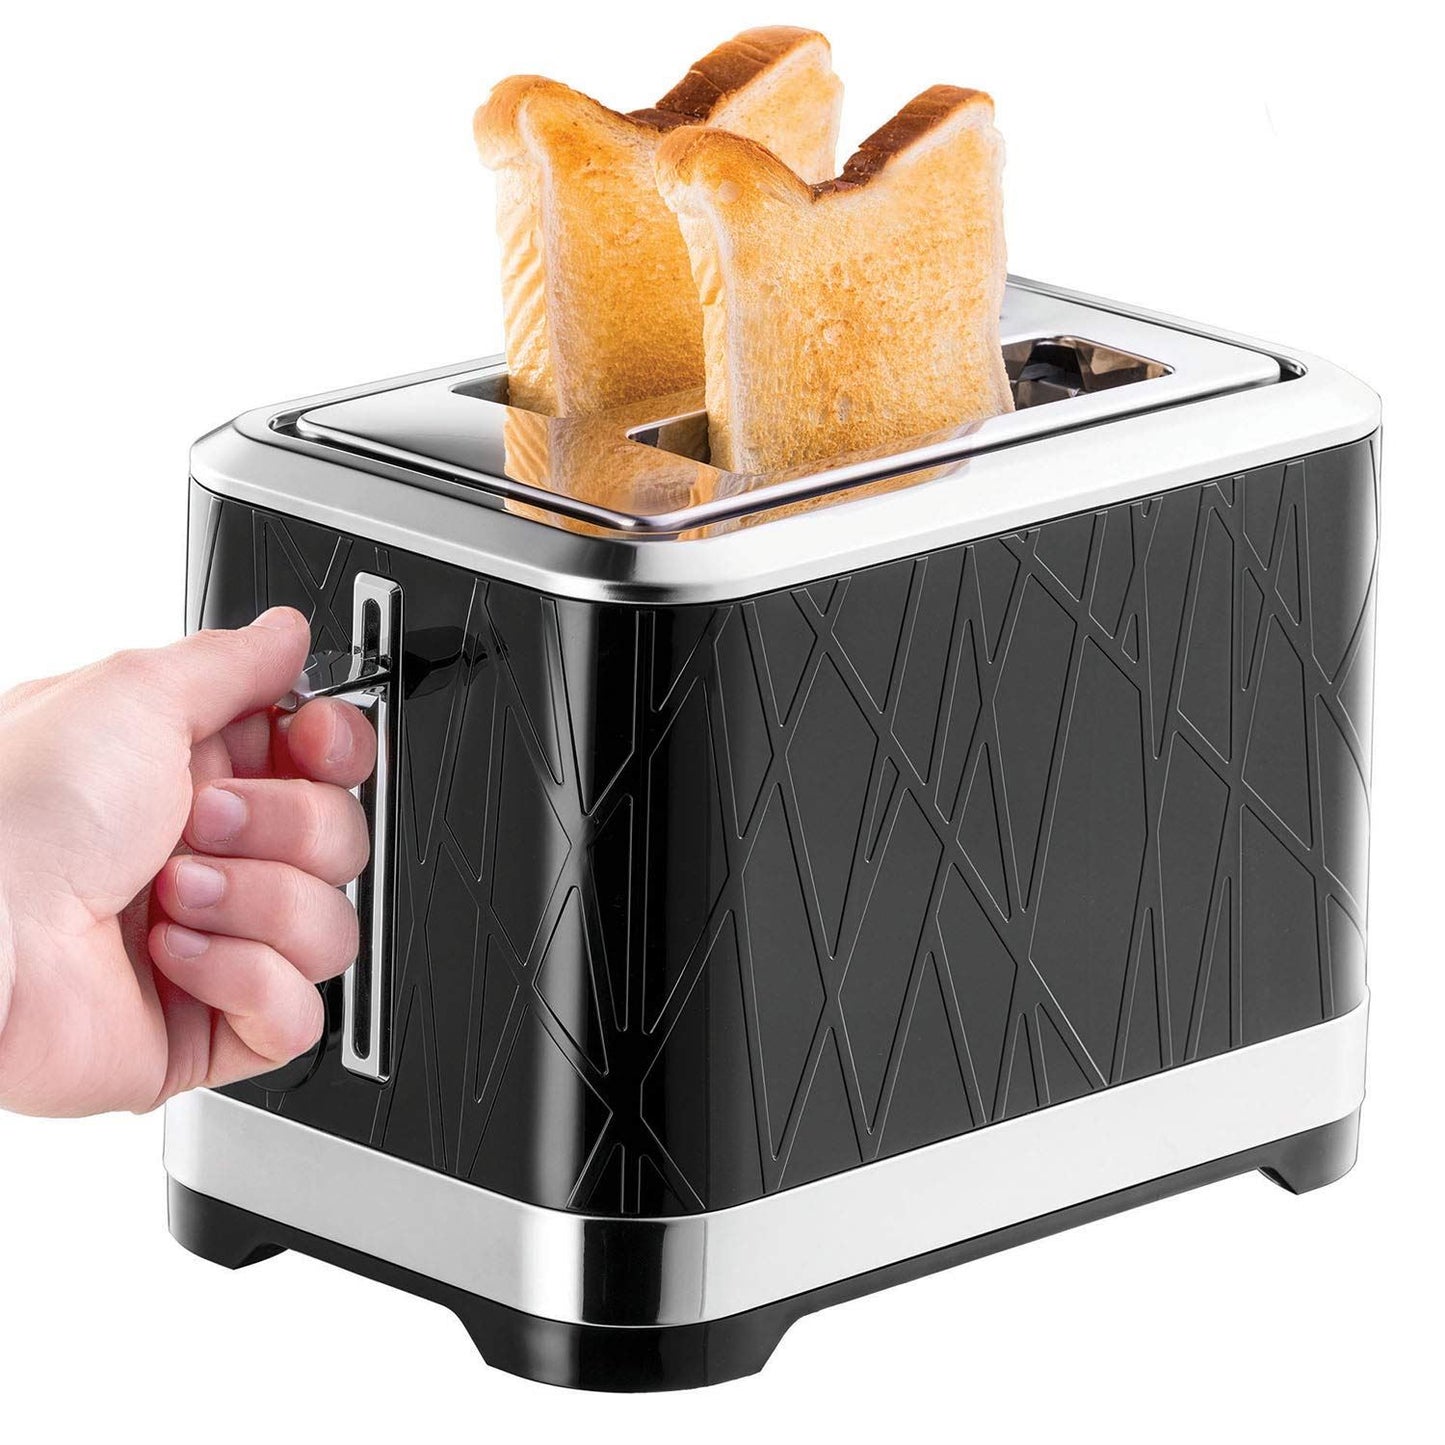 Russell Hobbs Structure Black 2 Slice Toaster